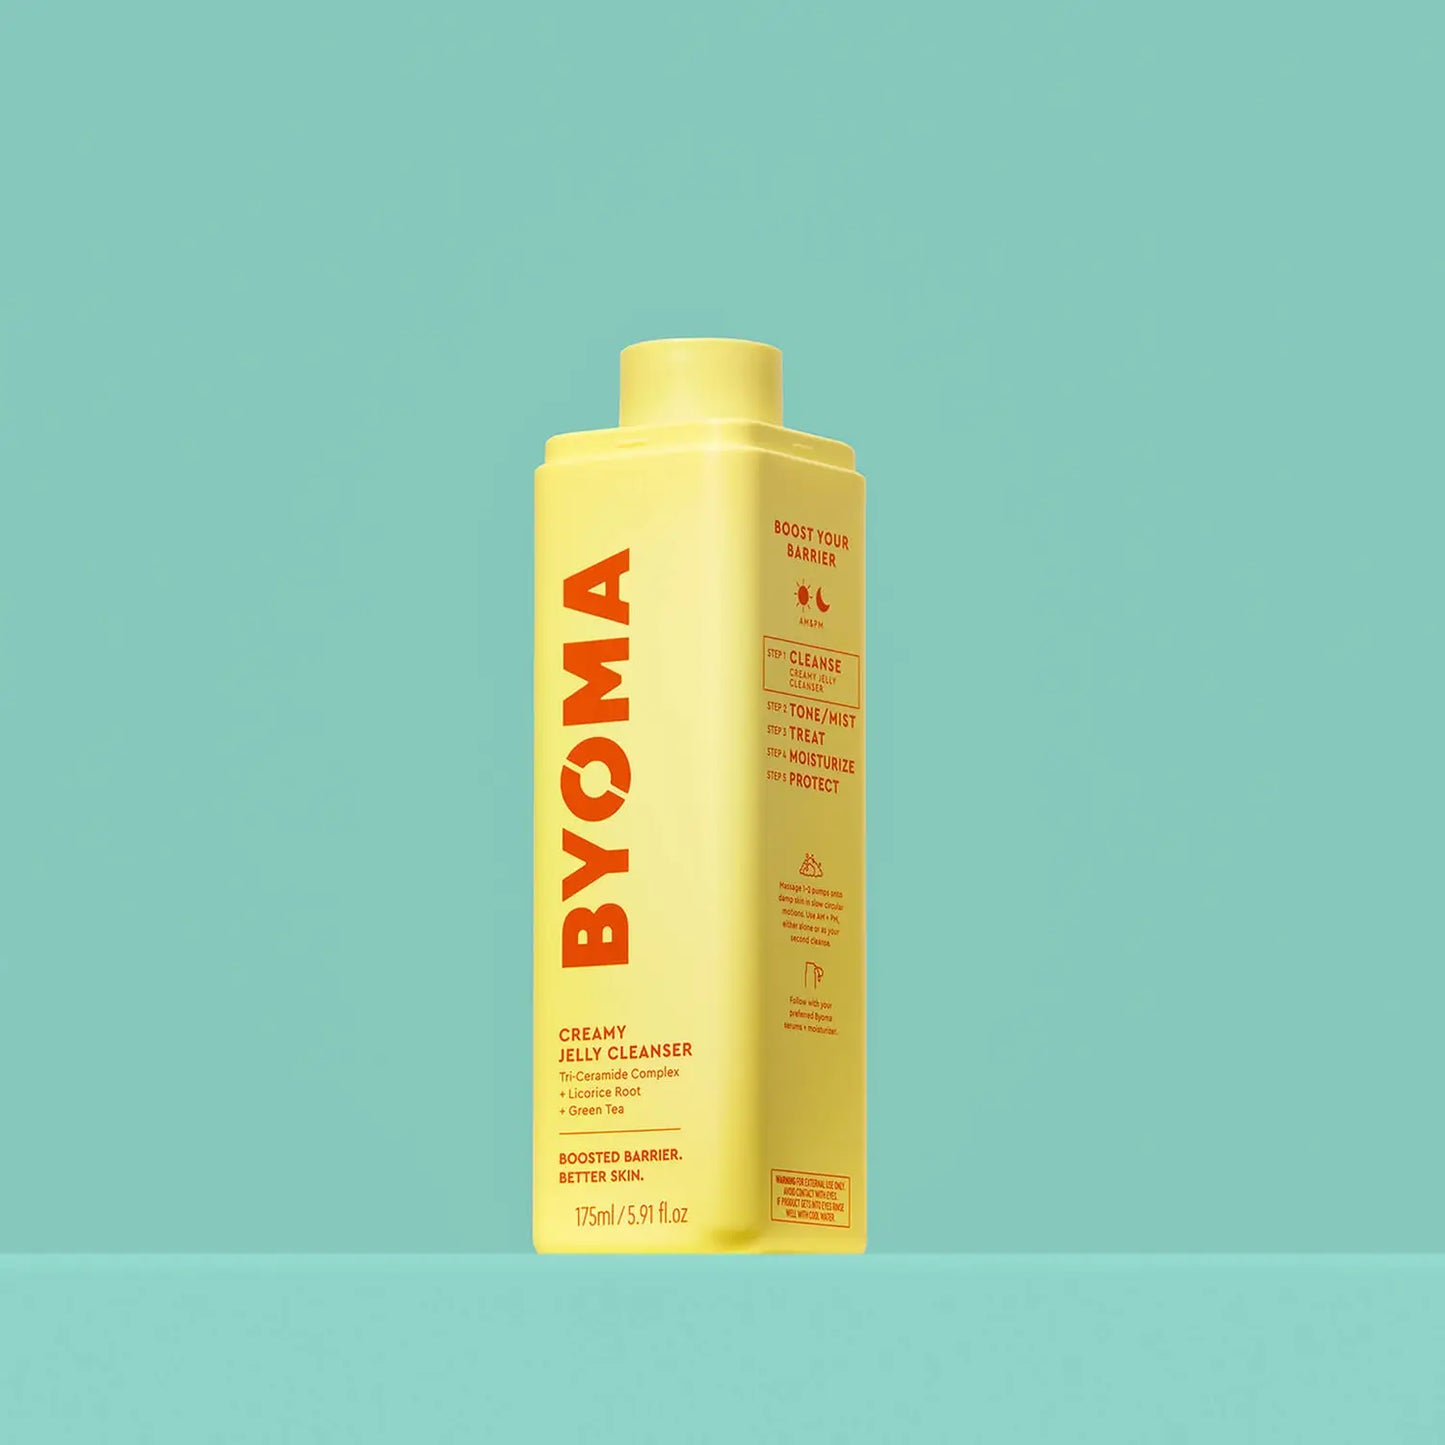 BYOMA | CREAMY JELLY CLEANSER REFILL